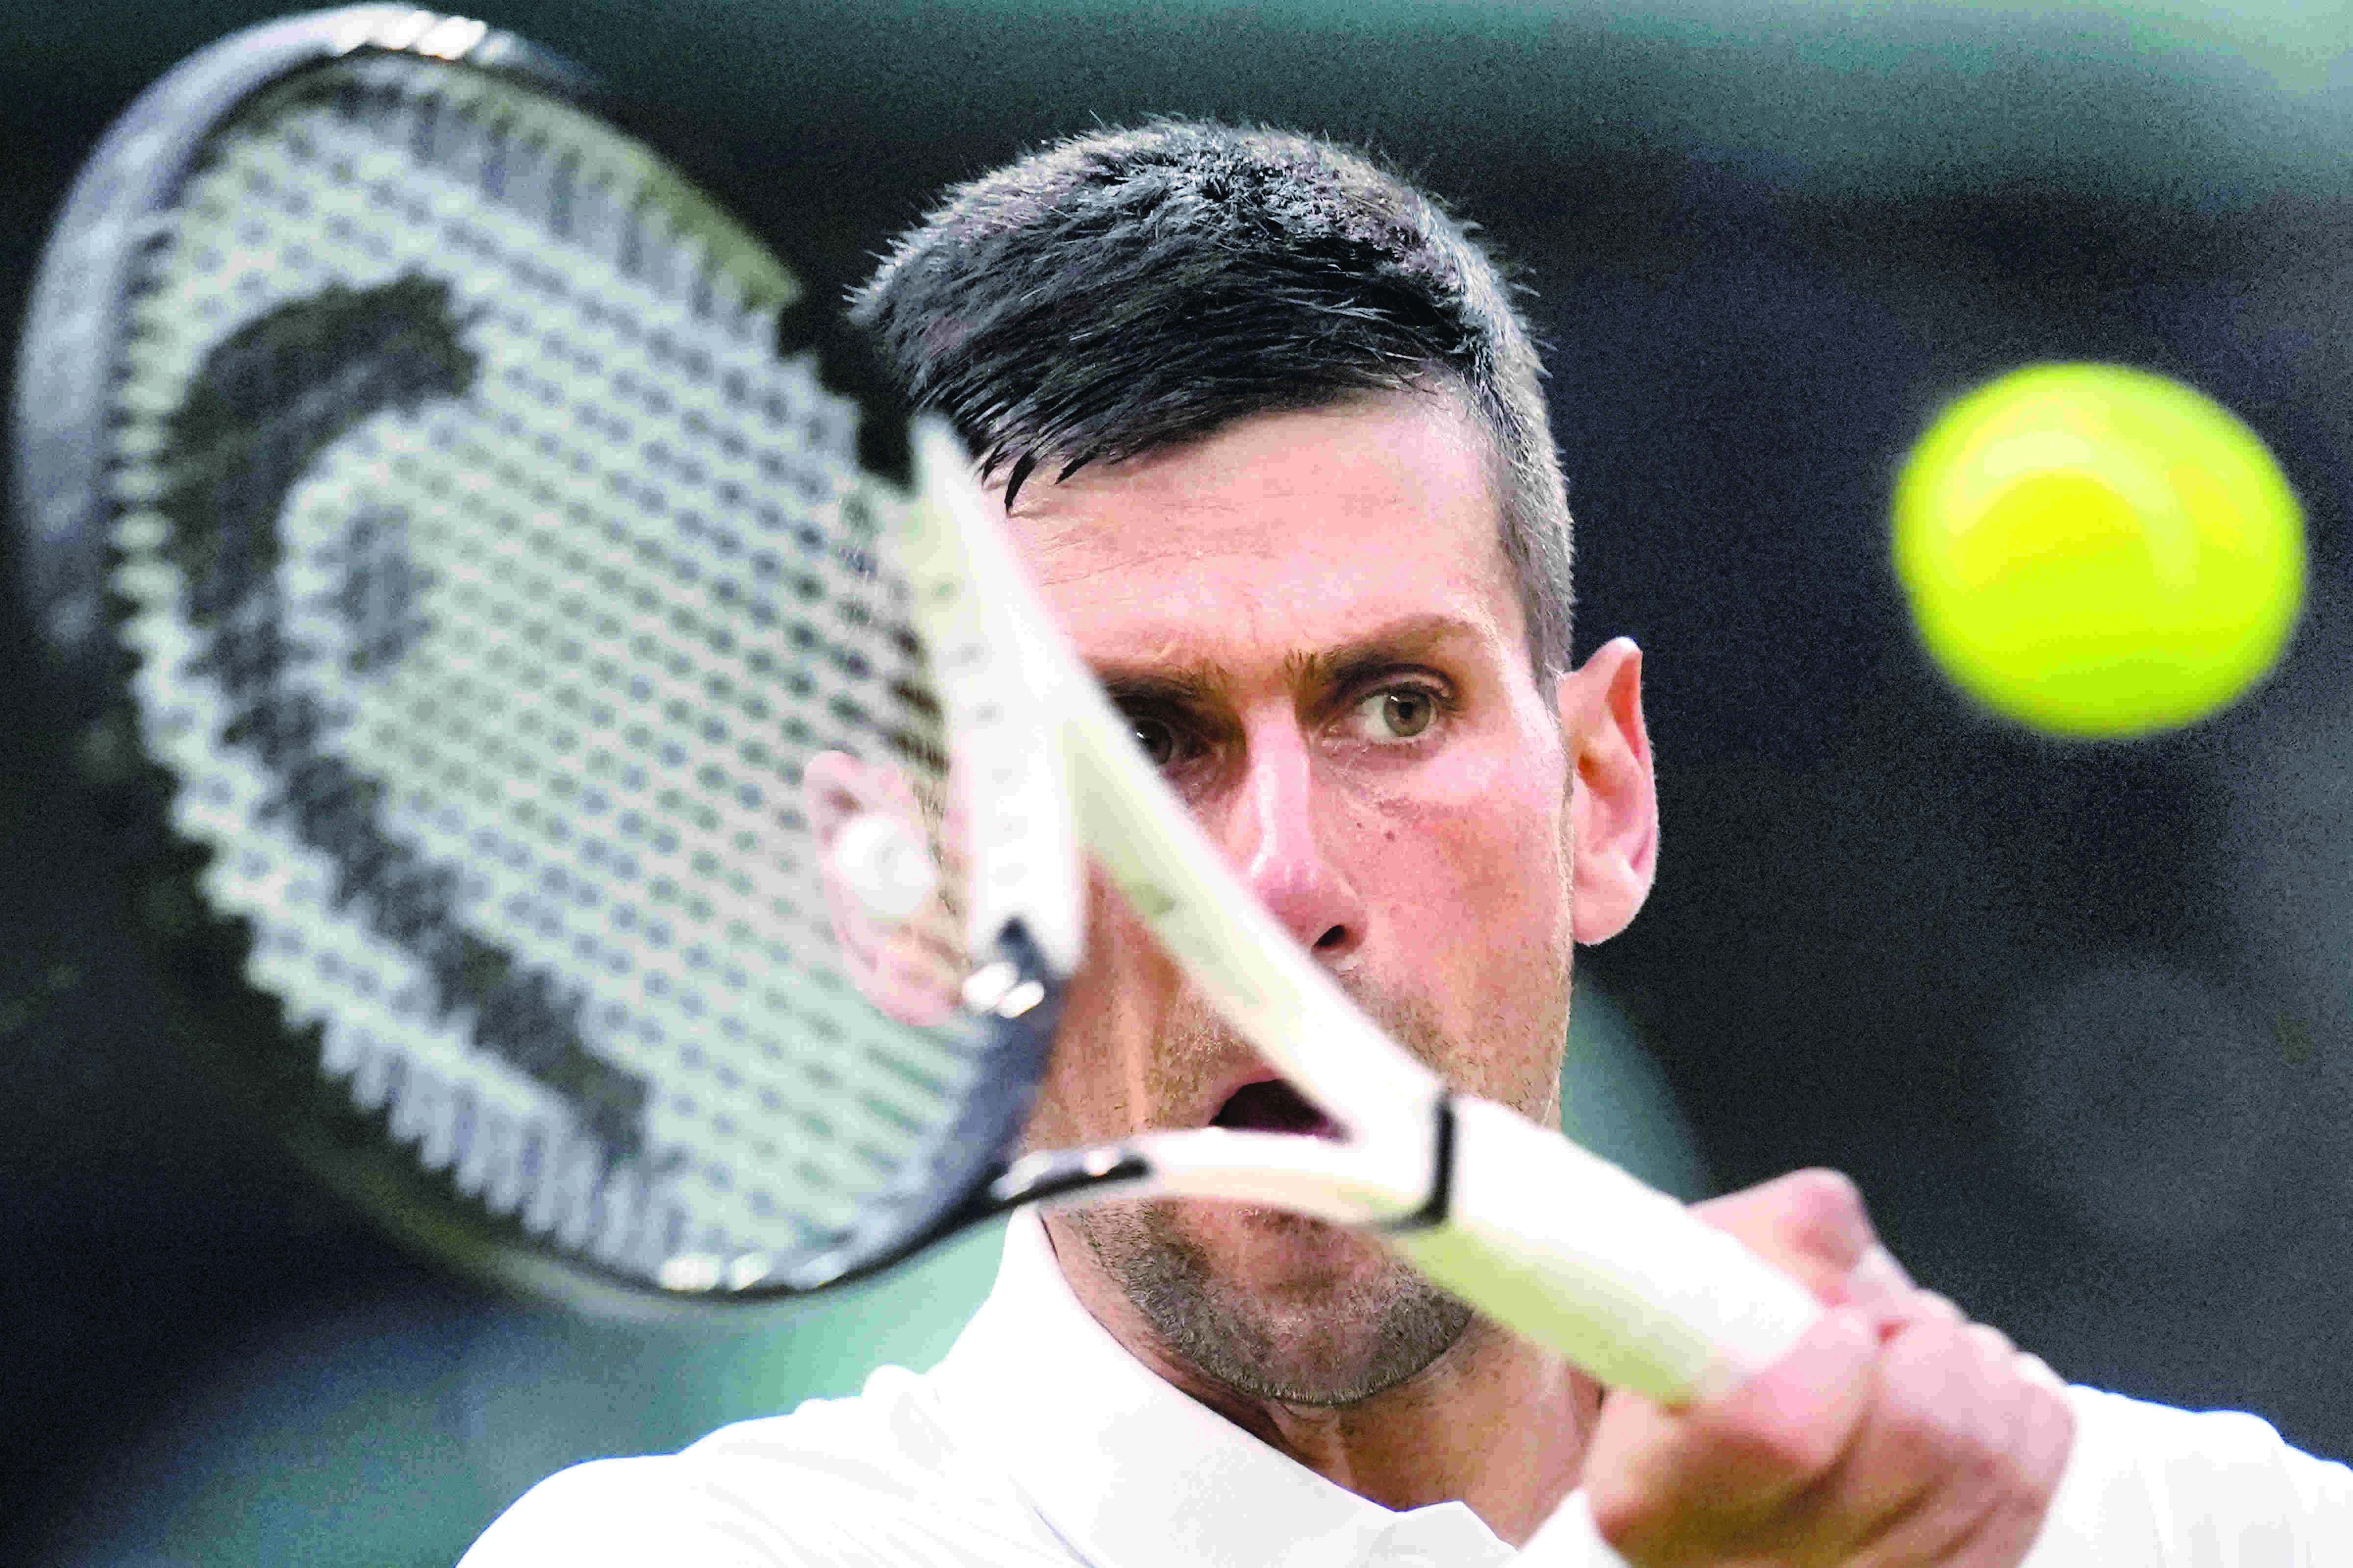 Djokovic stays up late for victory